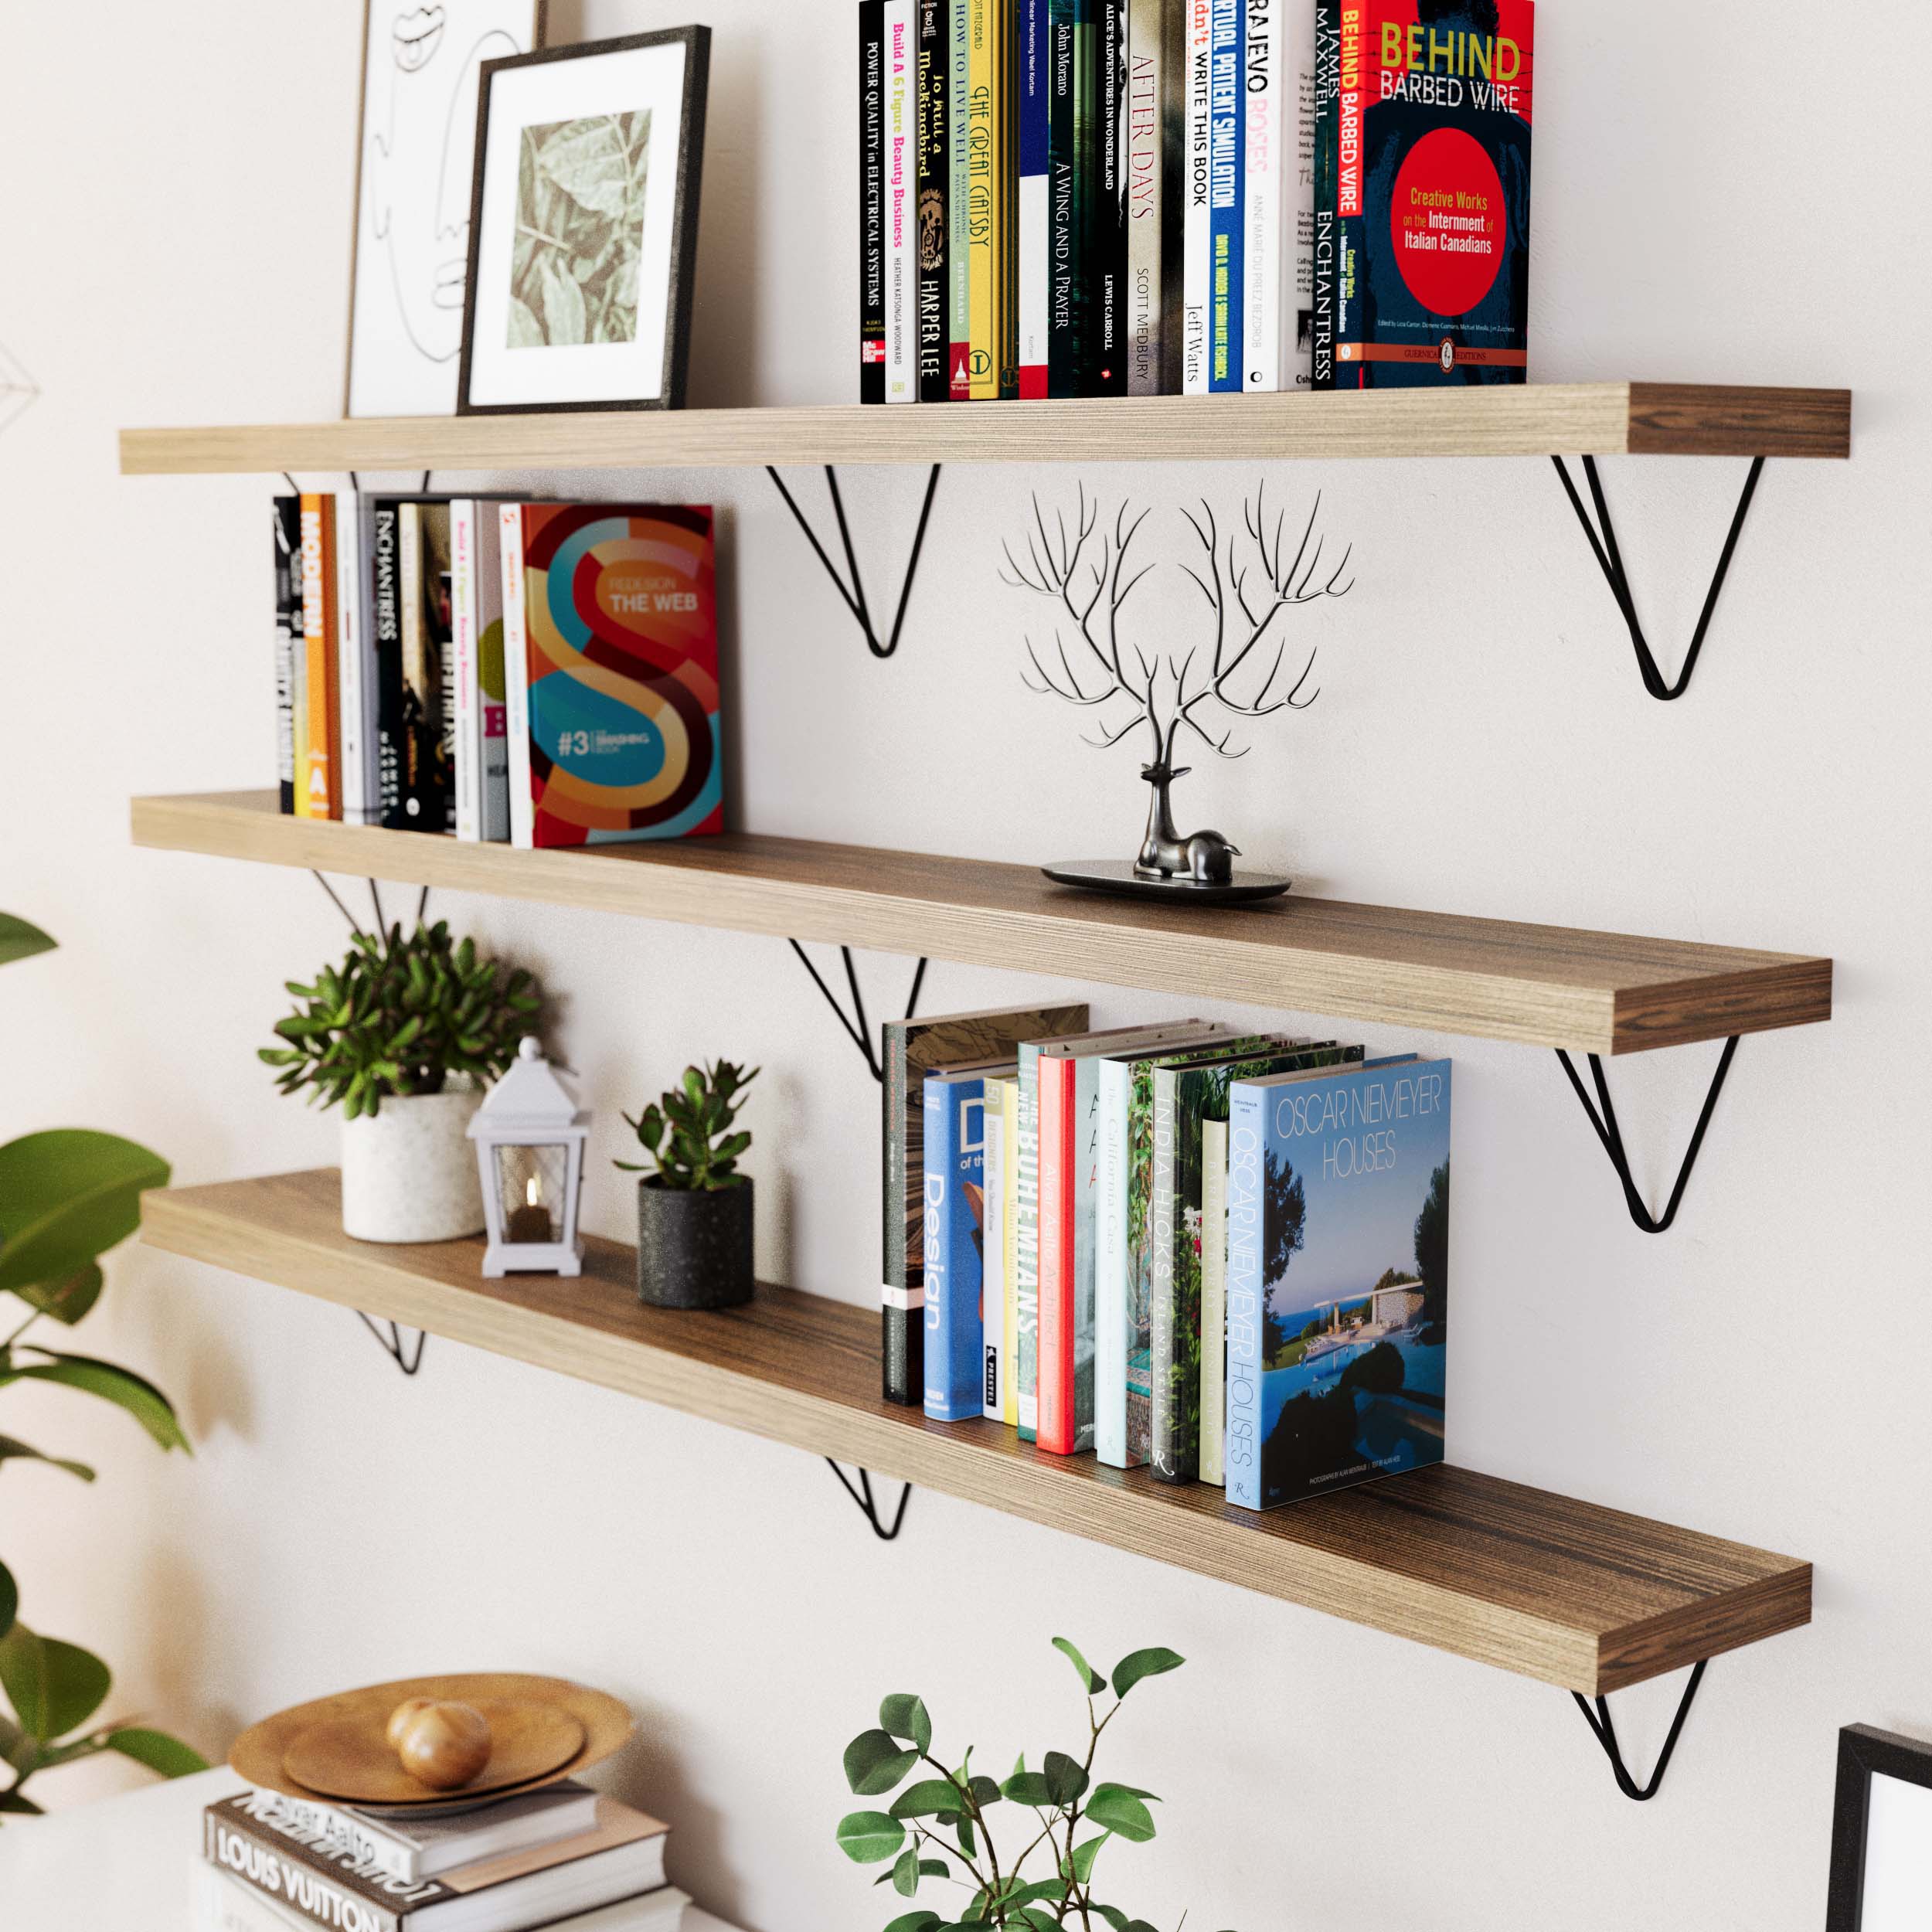 Living room with wooden shelves supported by black triangular heavy duty brackets, displaying books and wall decor.